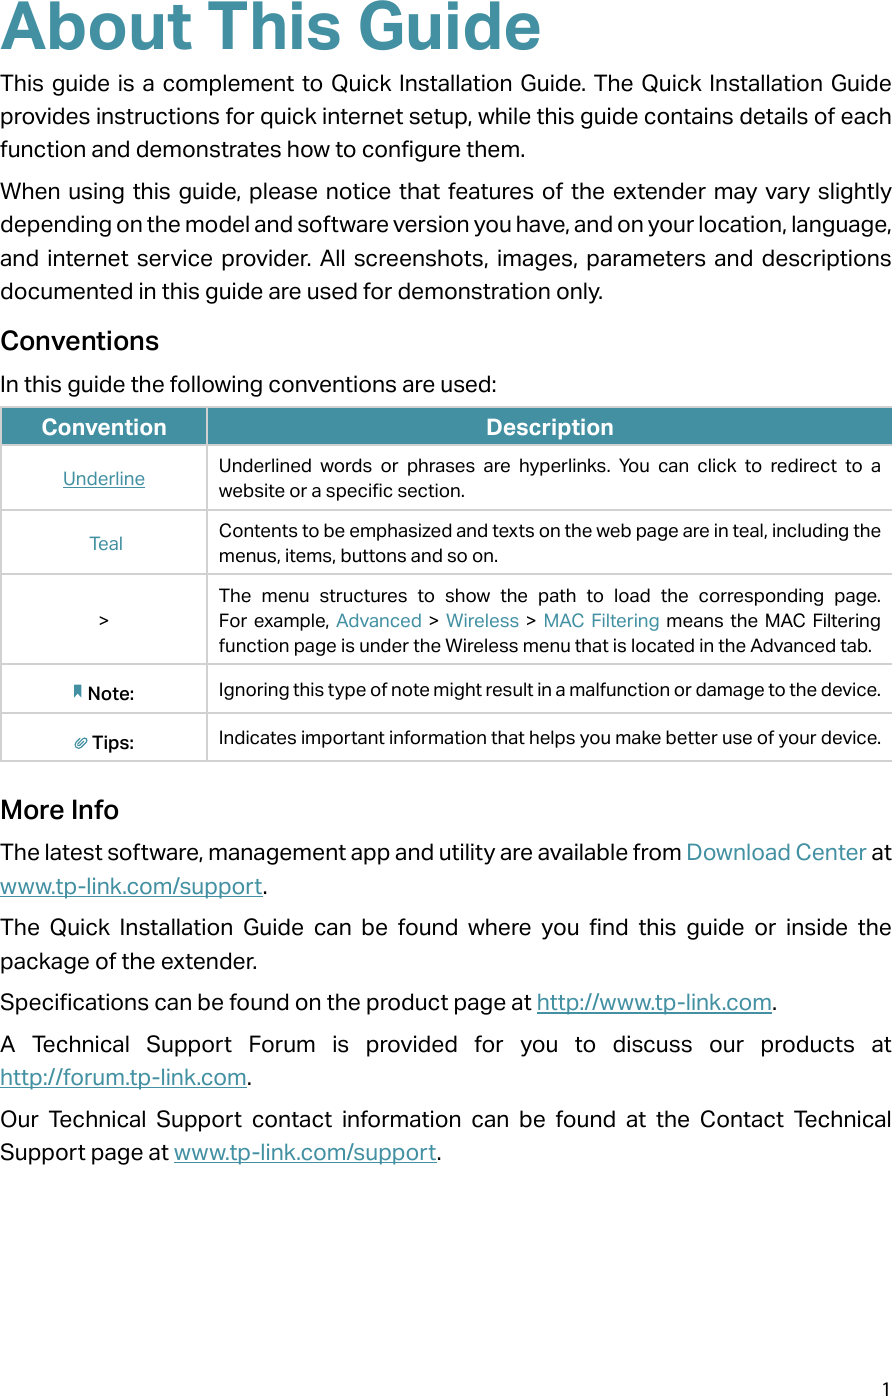 1About This GuideThis guide is a complement to Quick Installation Guide. The Quick Installation Guide provides instructions for quick internet setup, while this guide contains details of each function and demonstrates how to configure them. When using this guide, please notice that features of the extender may vary slightly depending on the model and software version you have, and on your location, language, and internet service provider. All screenshots, images, parameters and descriptions documented in this guide are used for demonstration only.ConventionsIn this guide the following conventions are used:Convention DescriptionUnderline Underlined words or phrases are hyperlinks. You can click to redirect to a website or a specific section. Teal Contents to be emphasized and texts on the web page are in teal, including the menus, items, buttons and so on.&gt;The menu structures to show the path to load the corresponding page. For example, Advanced &gt; Wireless &gt; MAC Filtering means the MAC Filtering function page is under the Wireless menu that is located in the Advanced tab.Note: Ignoring this type of note might result in a malfunction or damage to the device.Tips: Indicates important information that helps you make better use of your device.More InfoThe latest software, management app and utility are available from Download Center at www.tp-link.com/support.The Quick Installation Guide can be found where you find this guide or inside the package of the extender.Specifications can be found on the product page at http://www.tp-link.com.A Technical Support Forum is provided for you to discuss our products at  http://forum.tp-link.com.Our Technical Support contact information can be found at the Contact Technical Support page at www.tp-link.com/support.